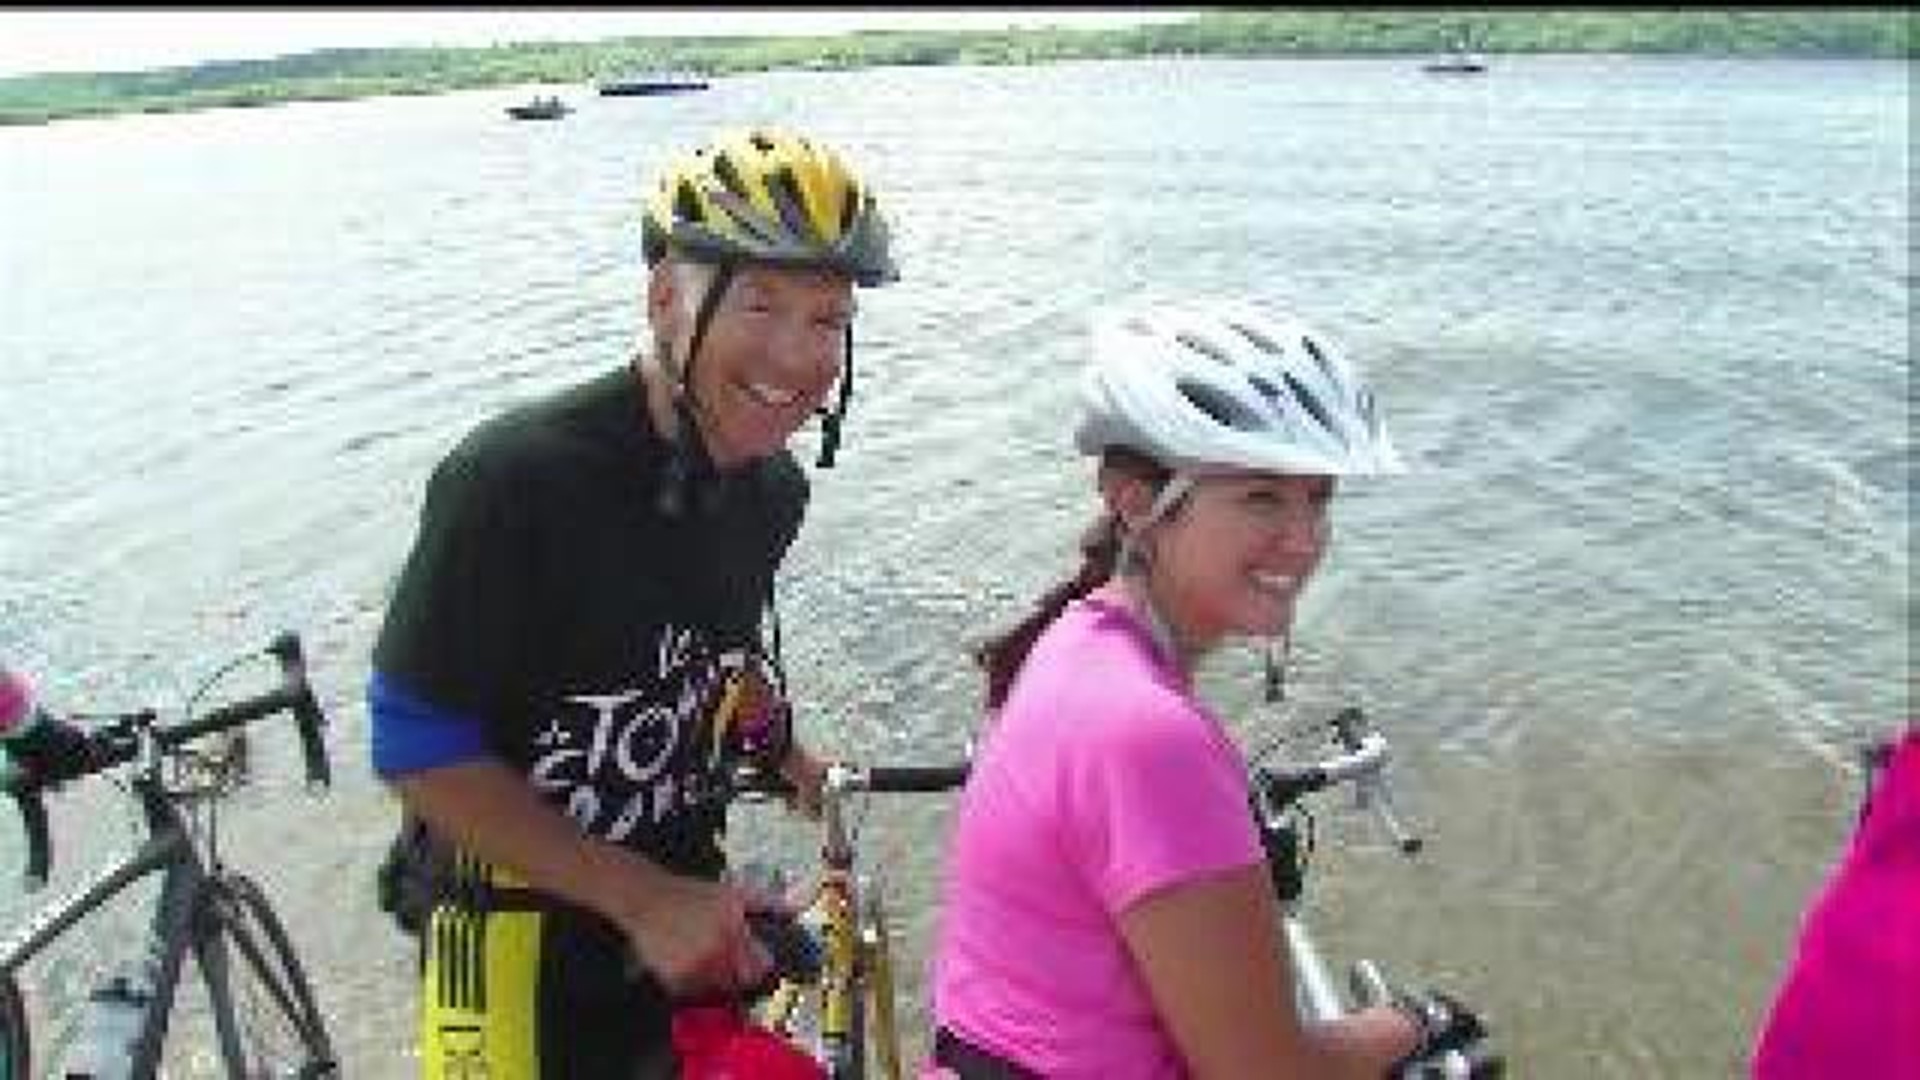 RAGBRAI ends in Fort Madison